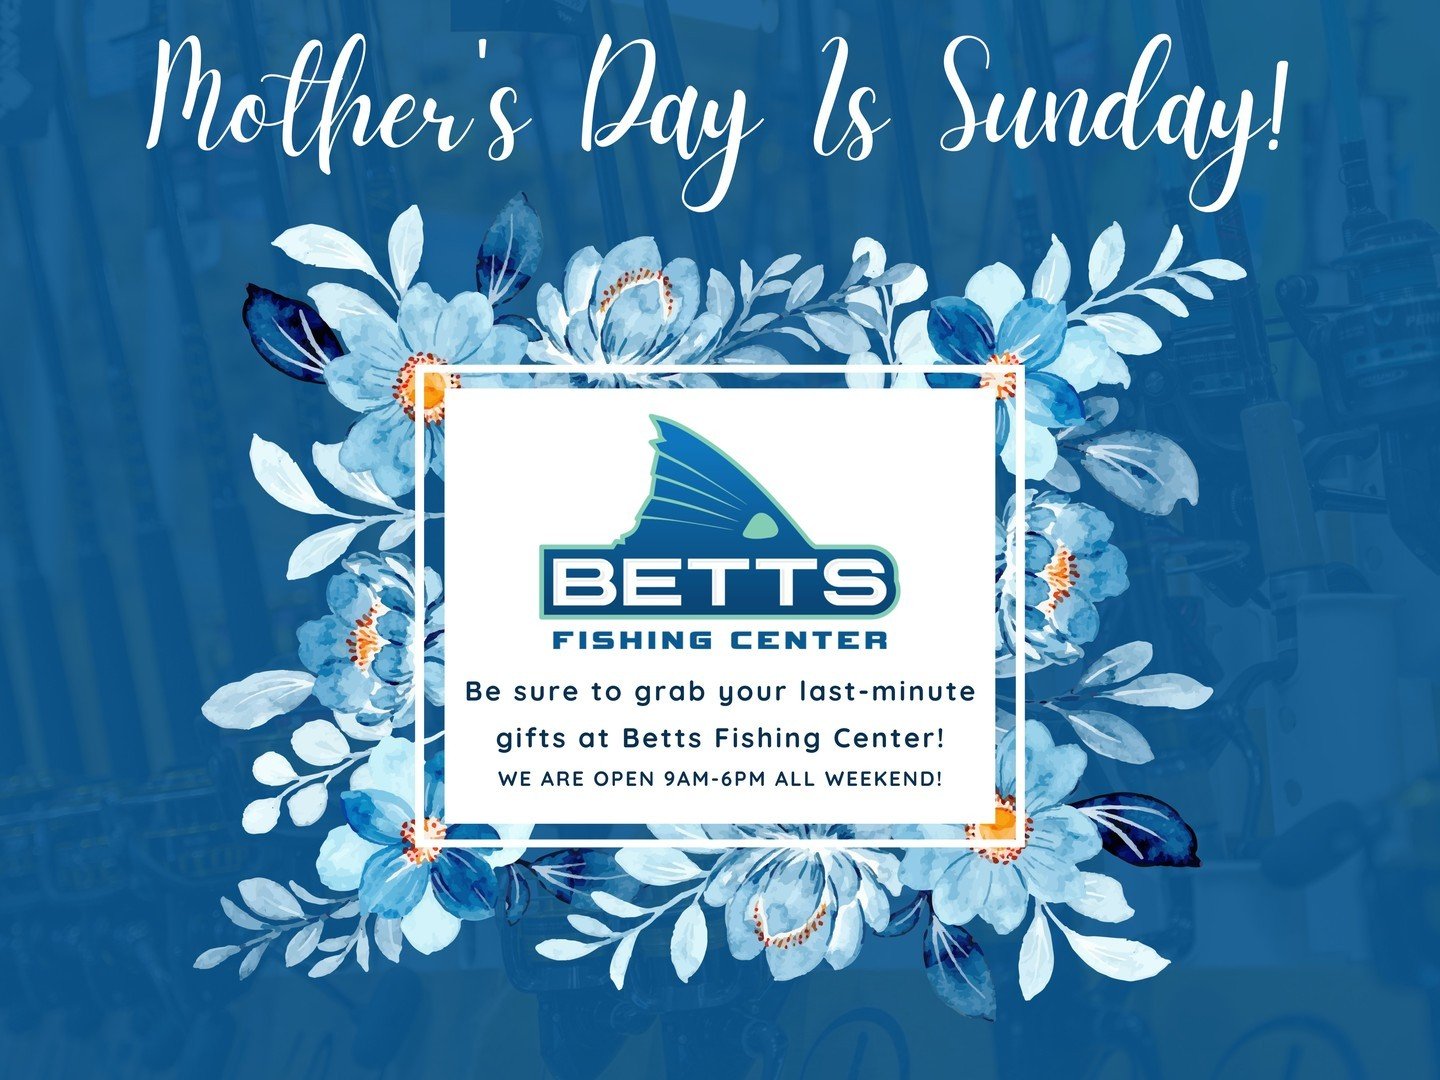 Mother's Day is this Sunday! Swing by Betts Fishing Center from 9 a.m. to 6 p.m. this weekend to pick up your last-minute gifts. Treat her to something special like new apparel, stylish sunglasses, or a top-of-the-line rod and reel setup!

#saltwater